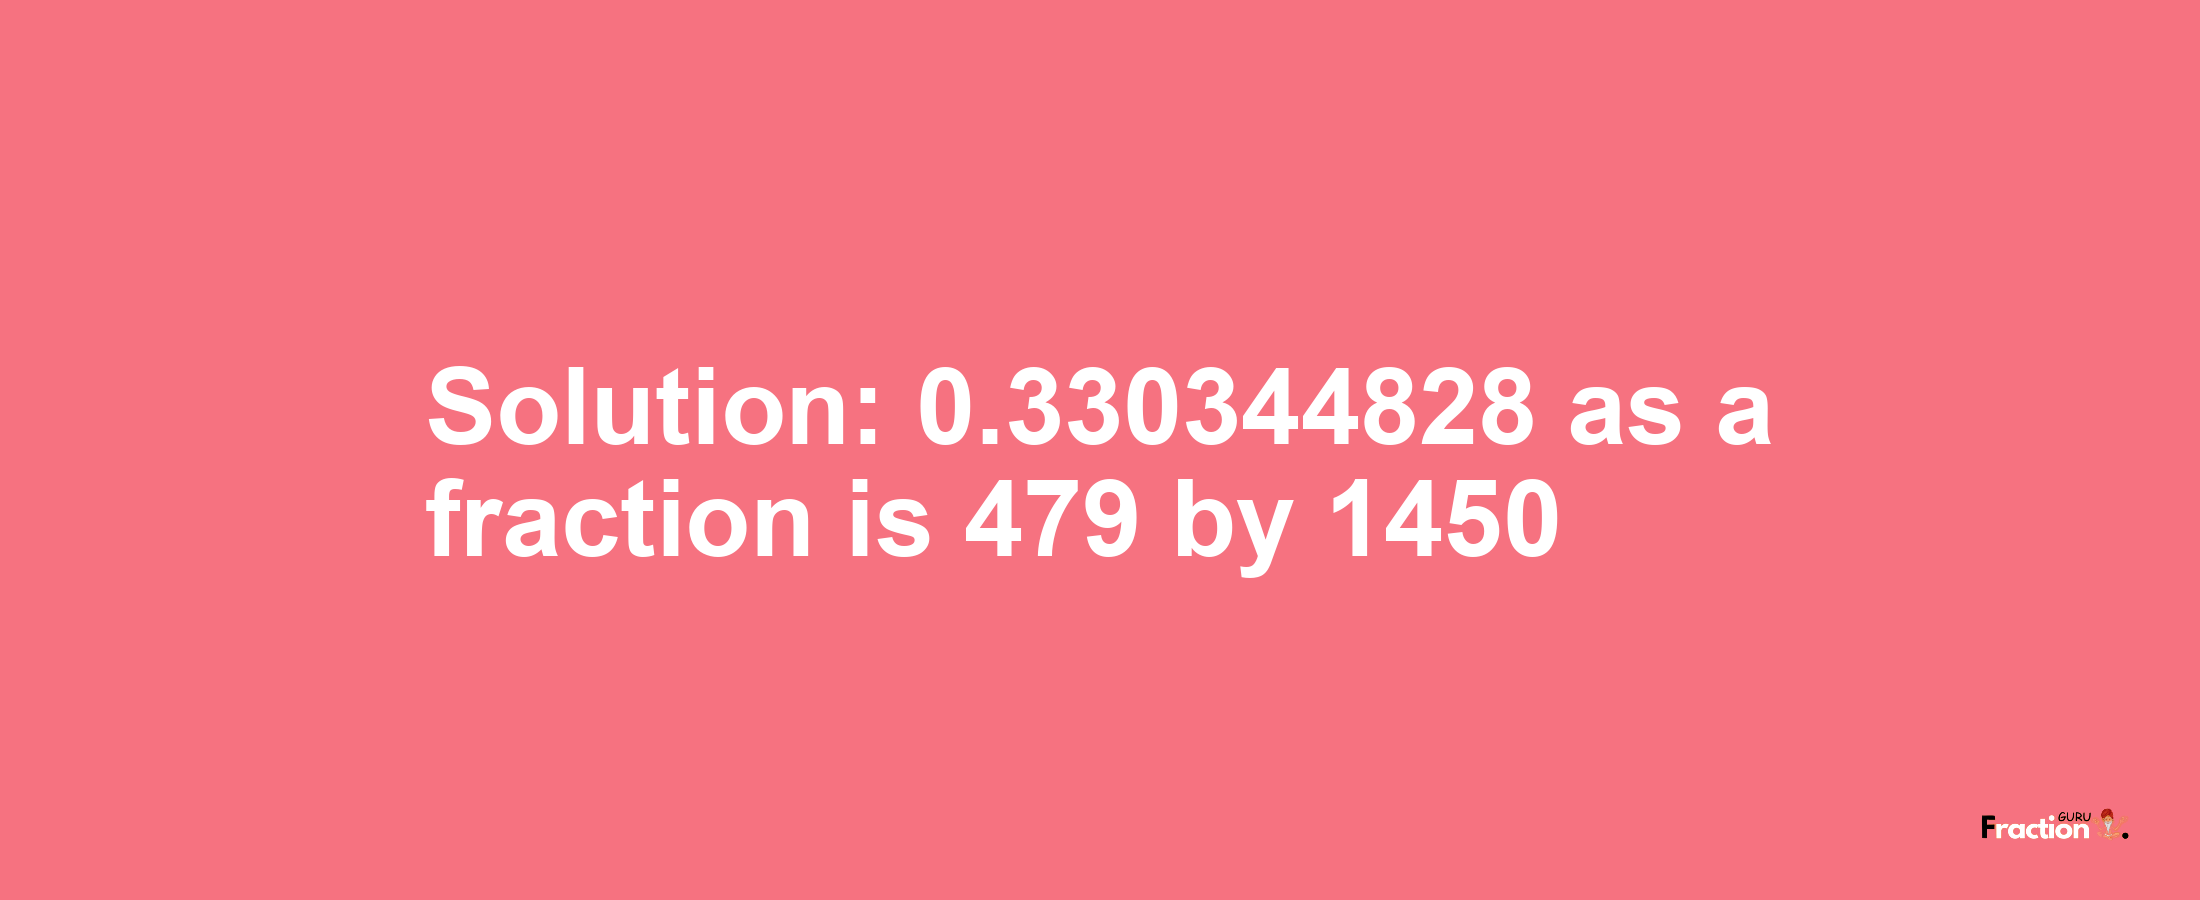 Solution:0.330344828 as a fraction is 479/1450